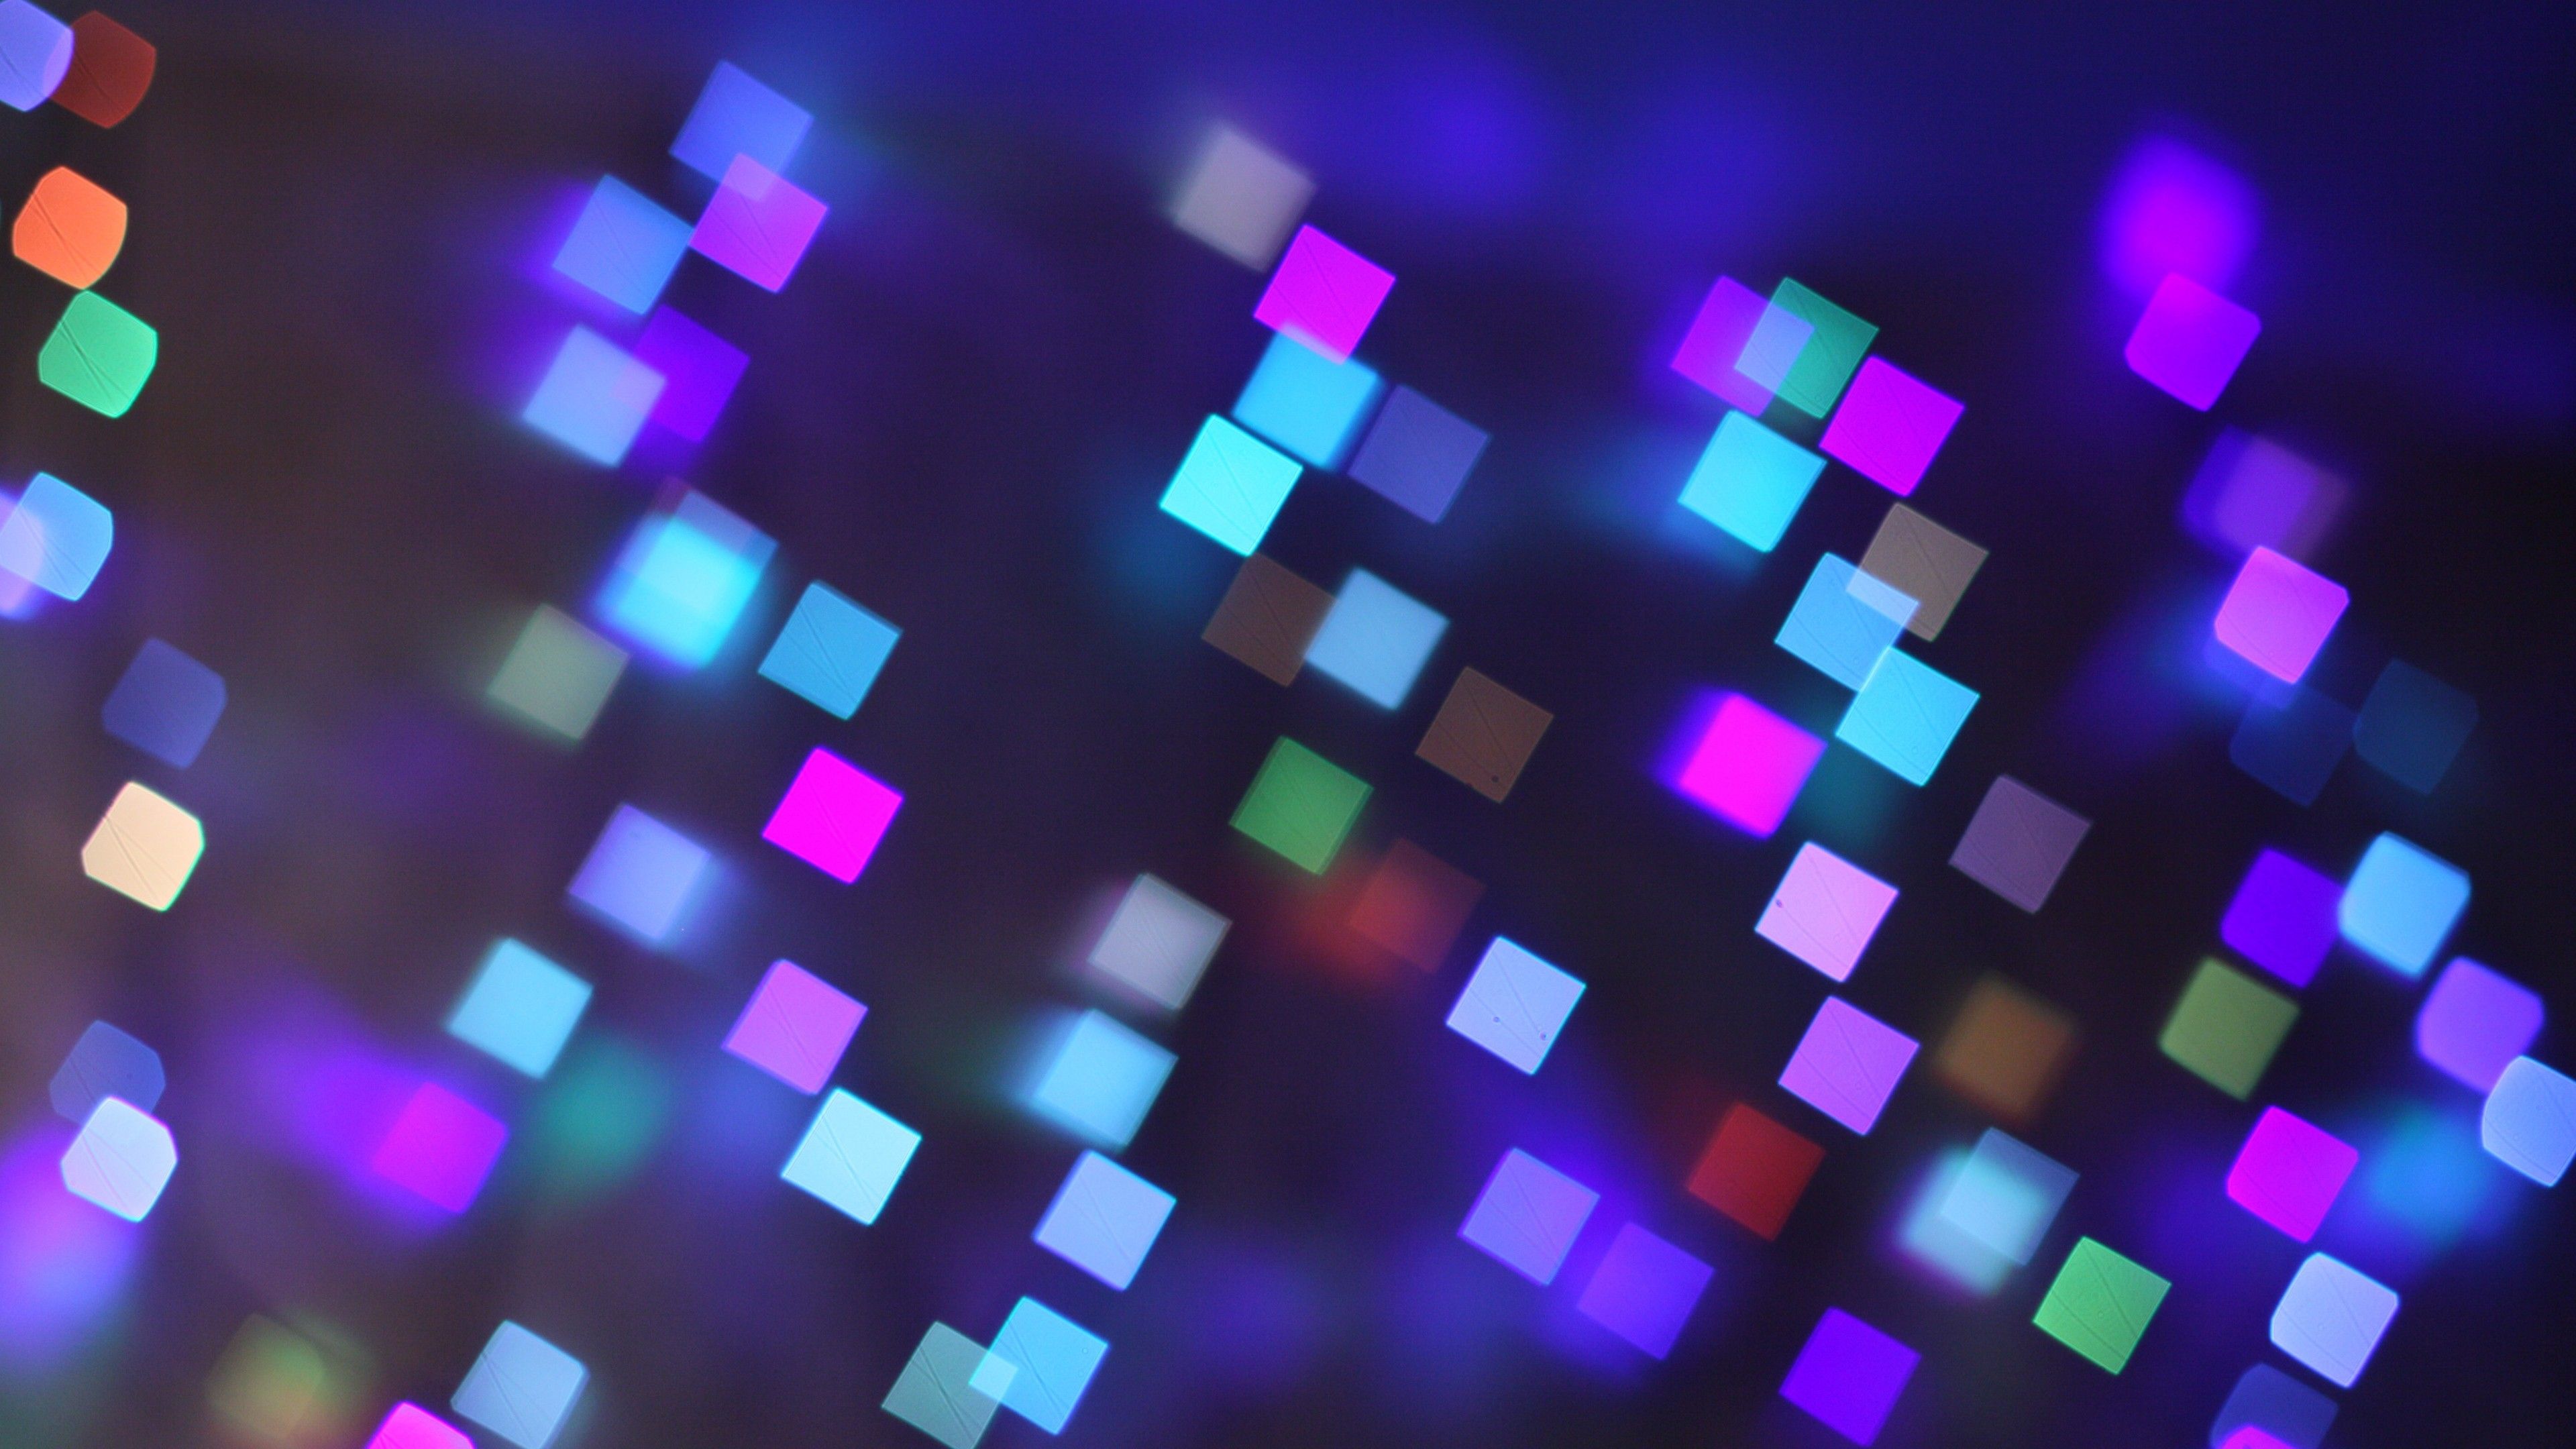 Bokeh Lights Pattern Texture Square Blurred Colorful, HD Abstract